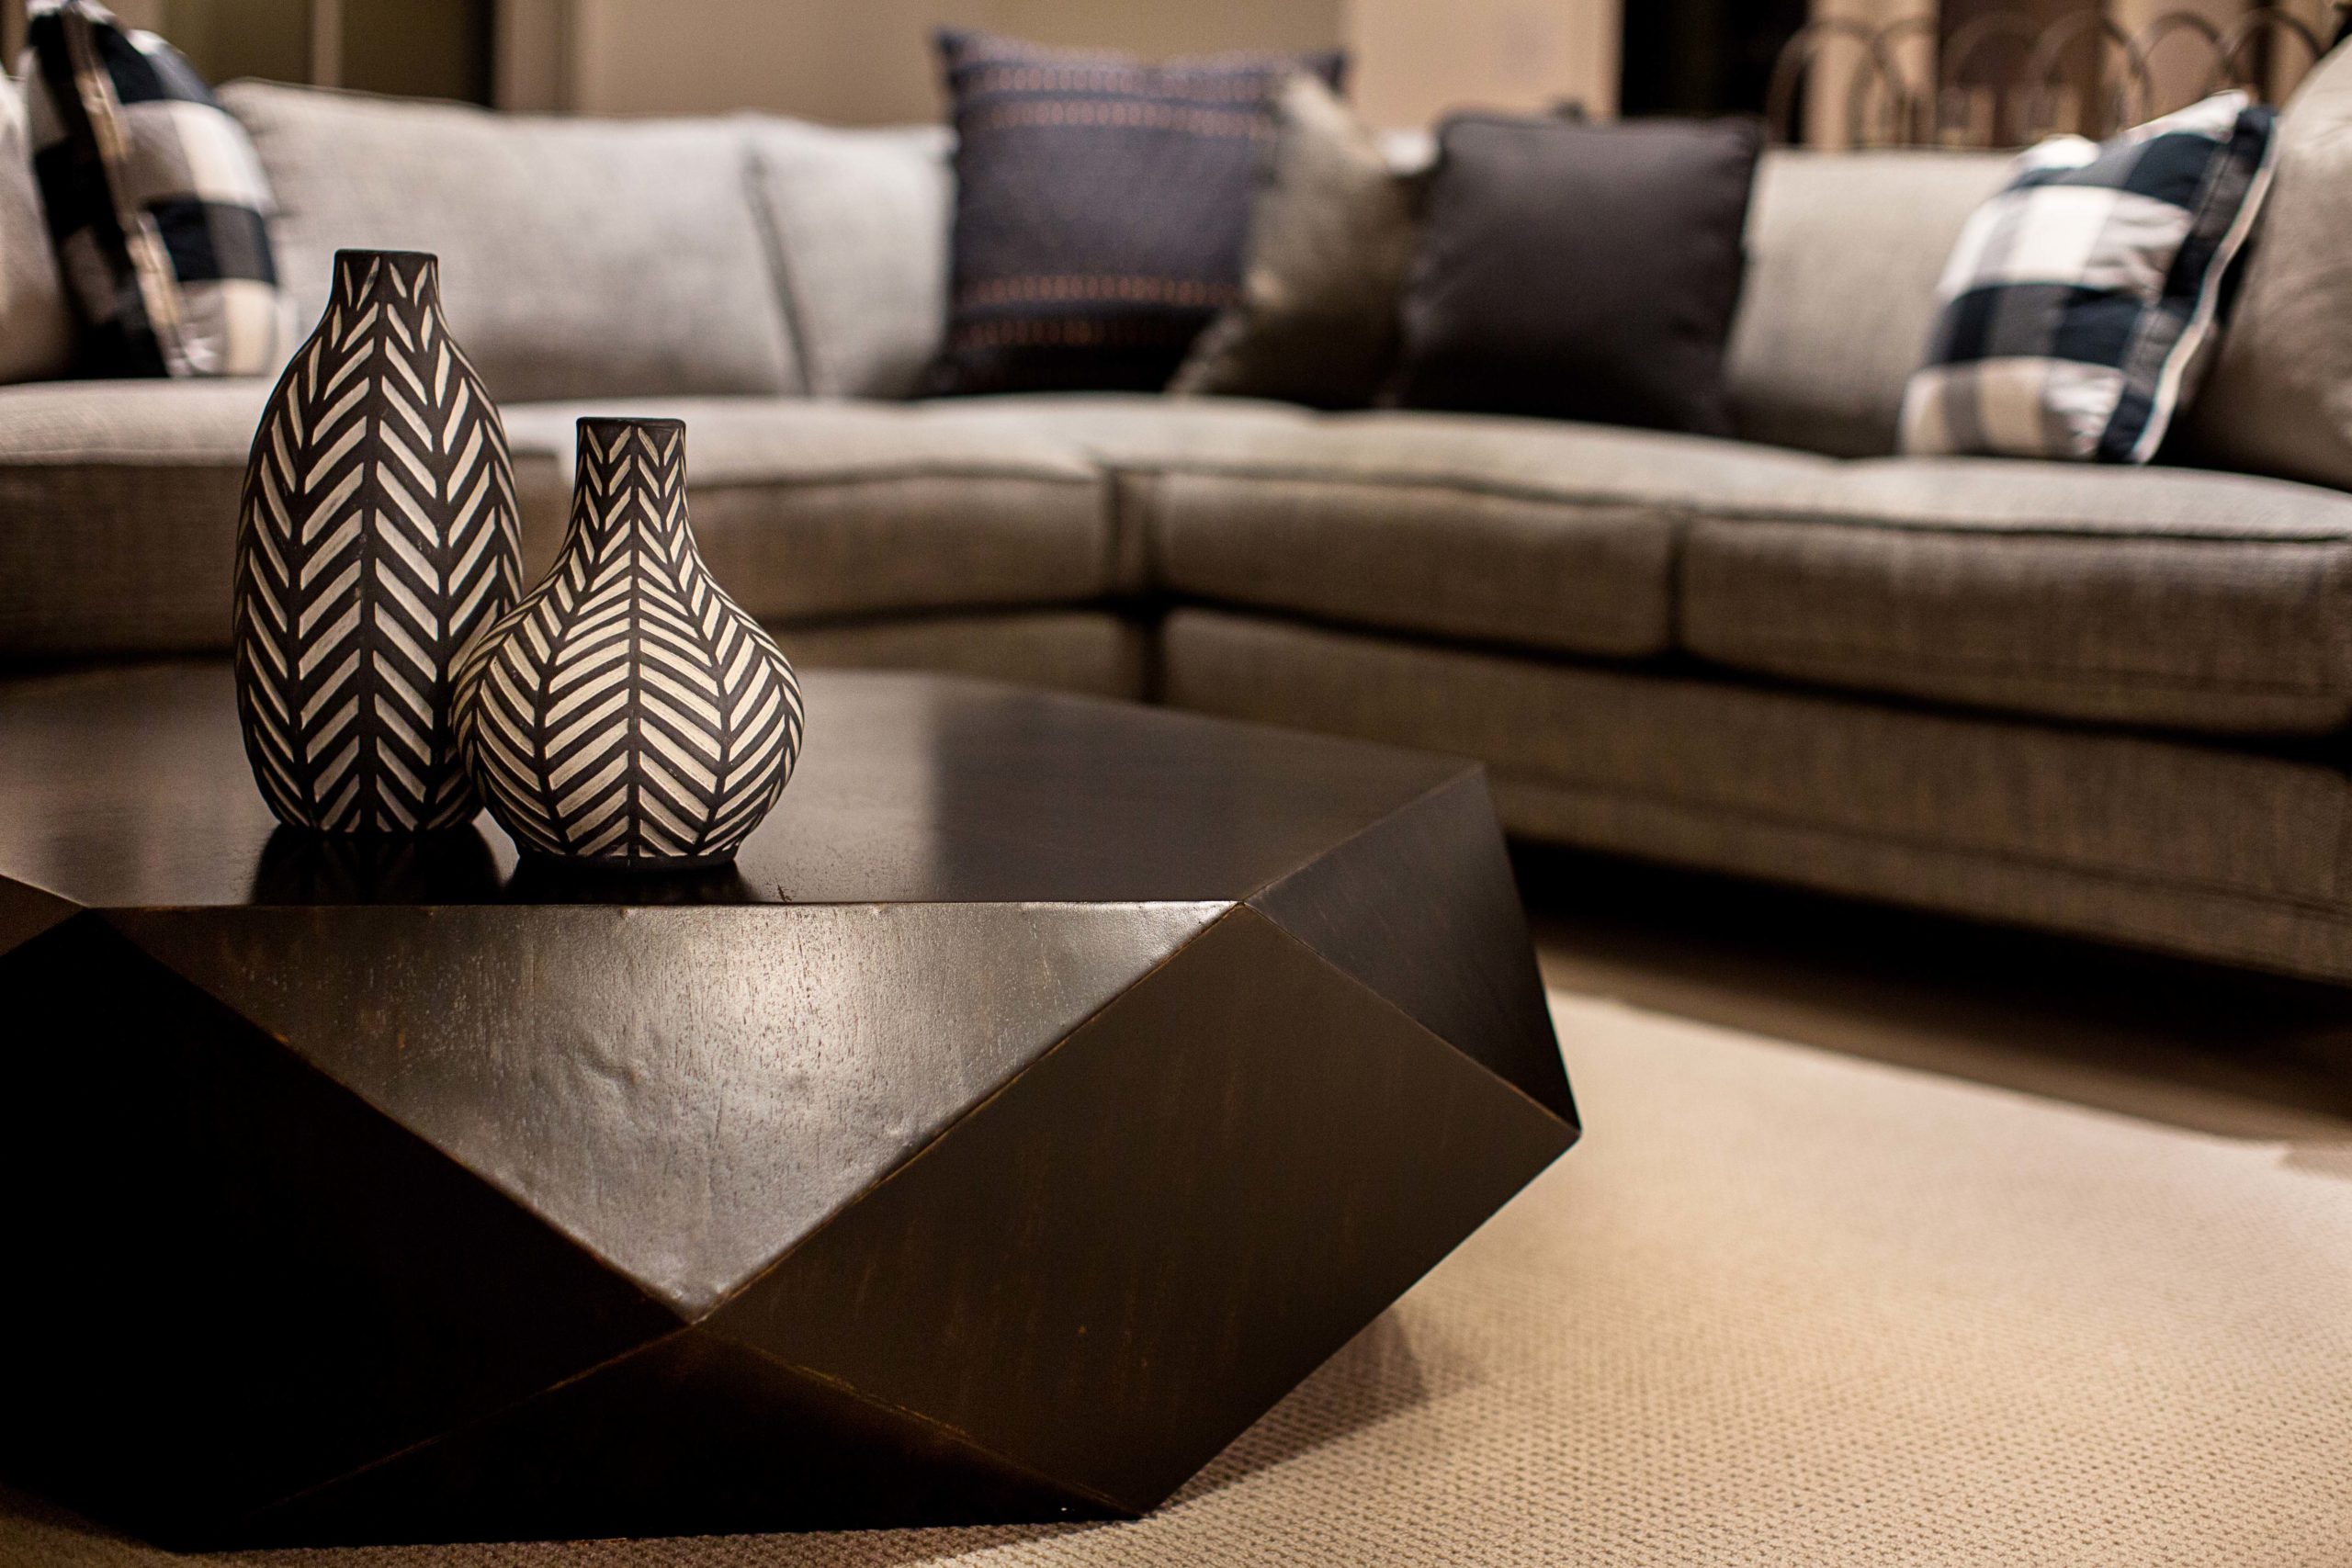 Abstract brown coffee table with 2 decorative vases by sectional couch.